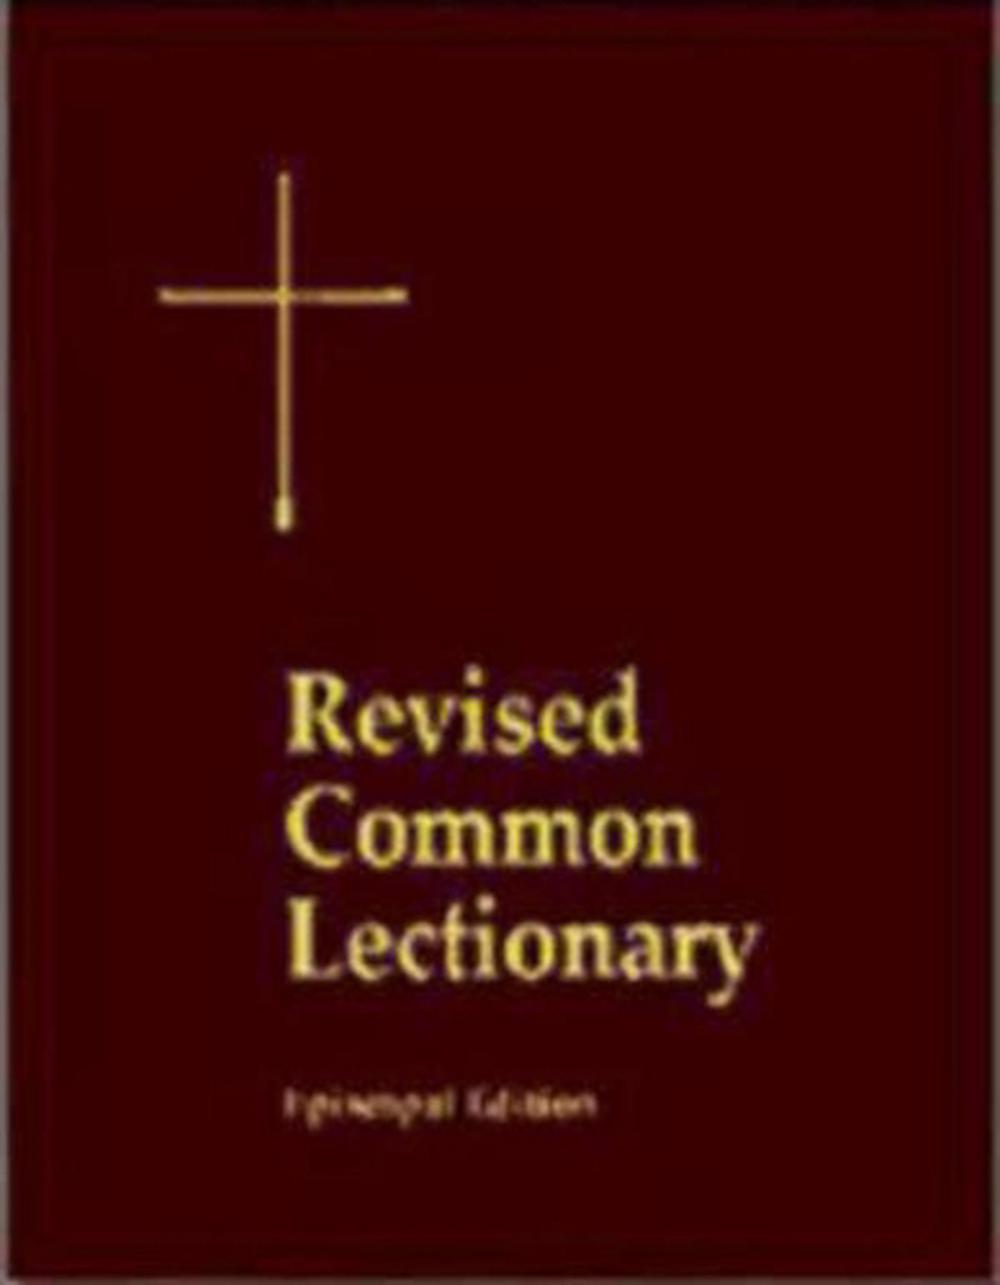 The Revised Common Lectionary Years A, B, C, and Holy Days According